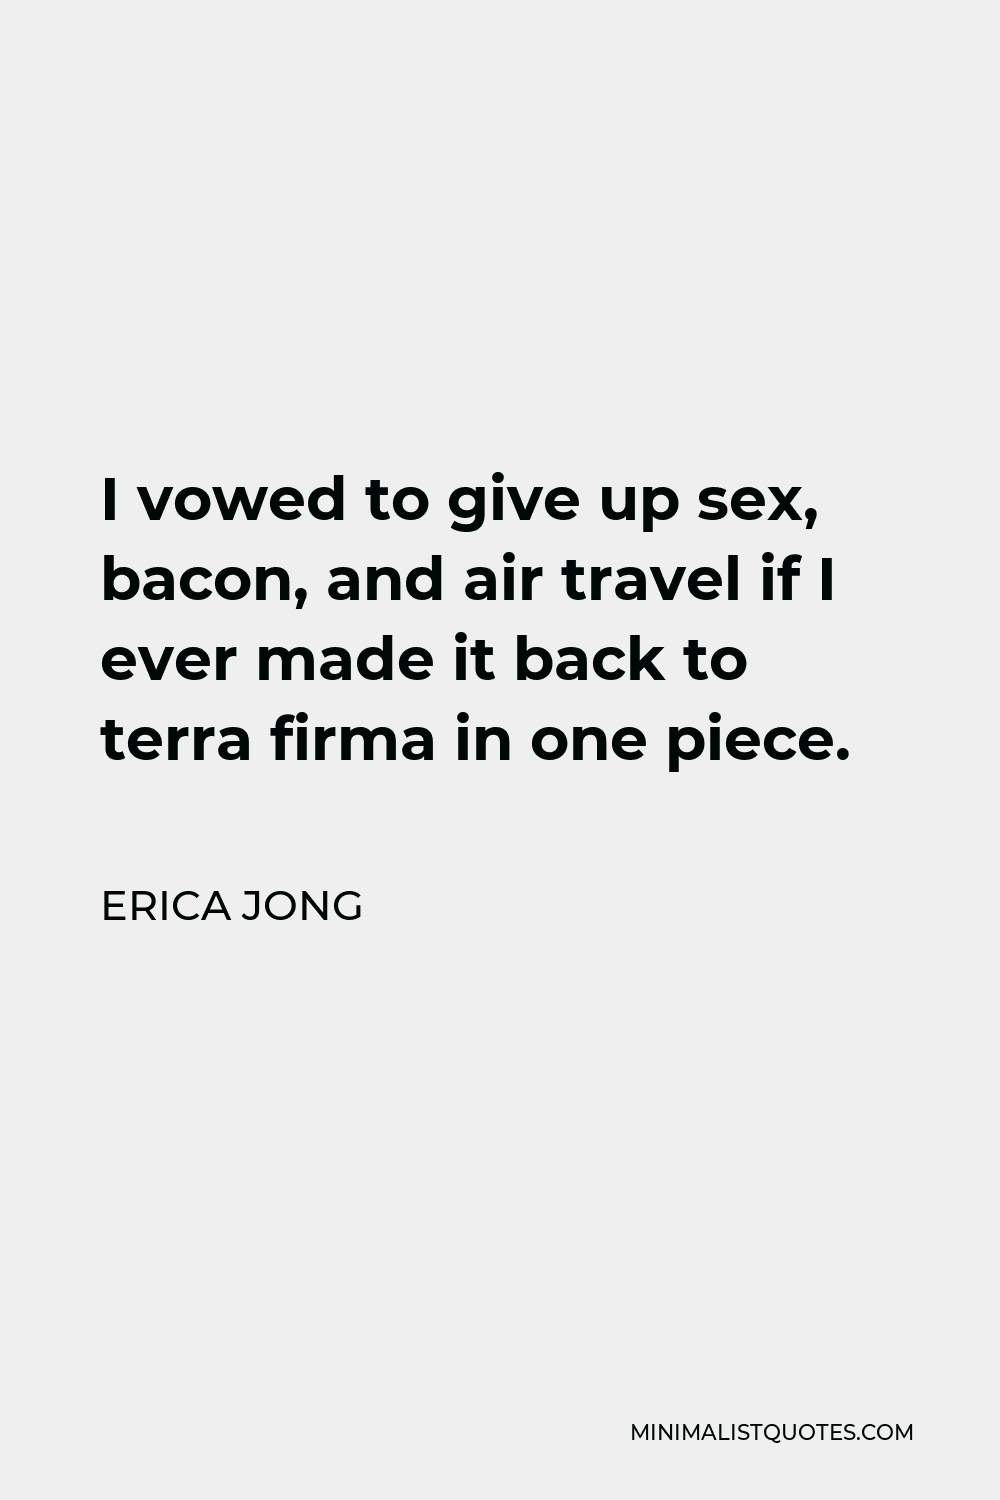 Erica Jong Quote - I vowed to give up sex, bacon, and air travel if I ever made it back to terra firma in one piece.